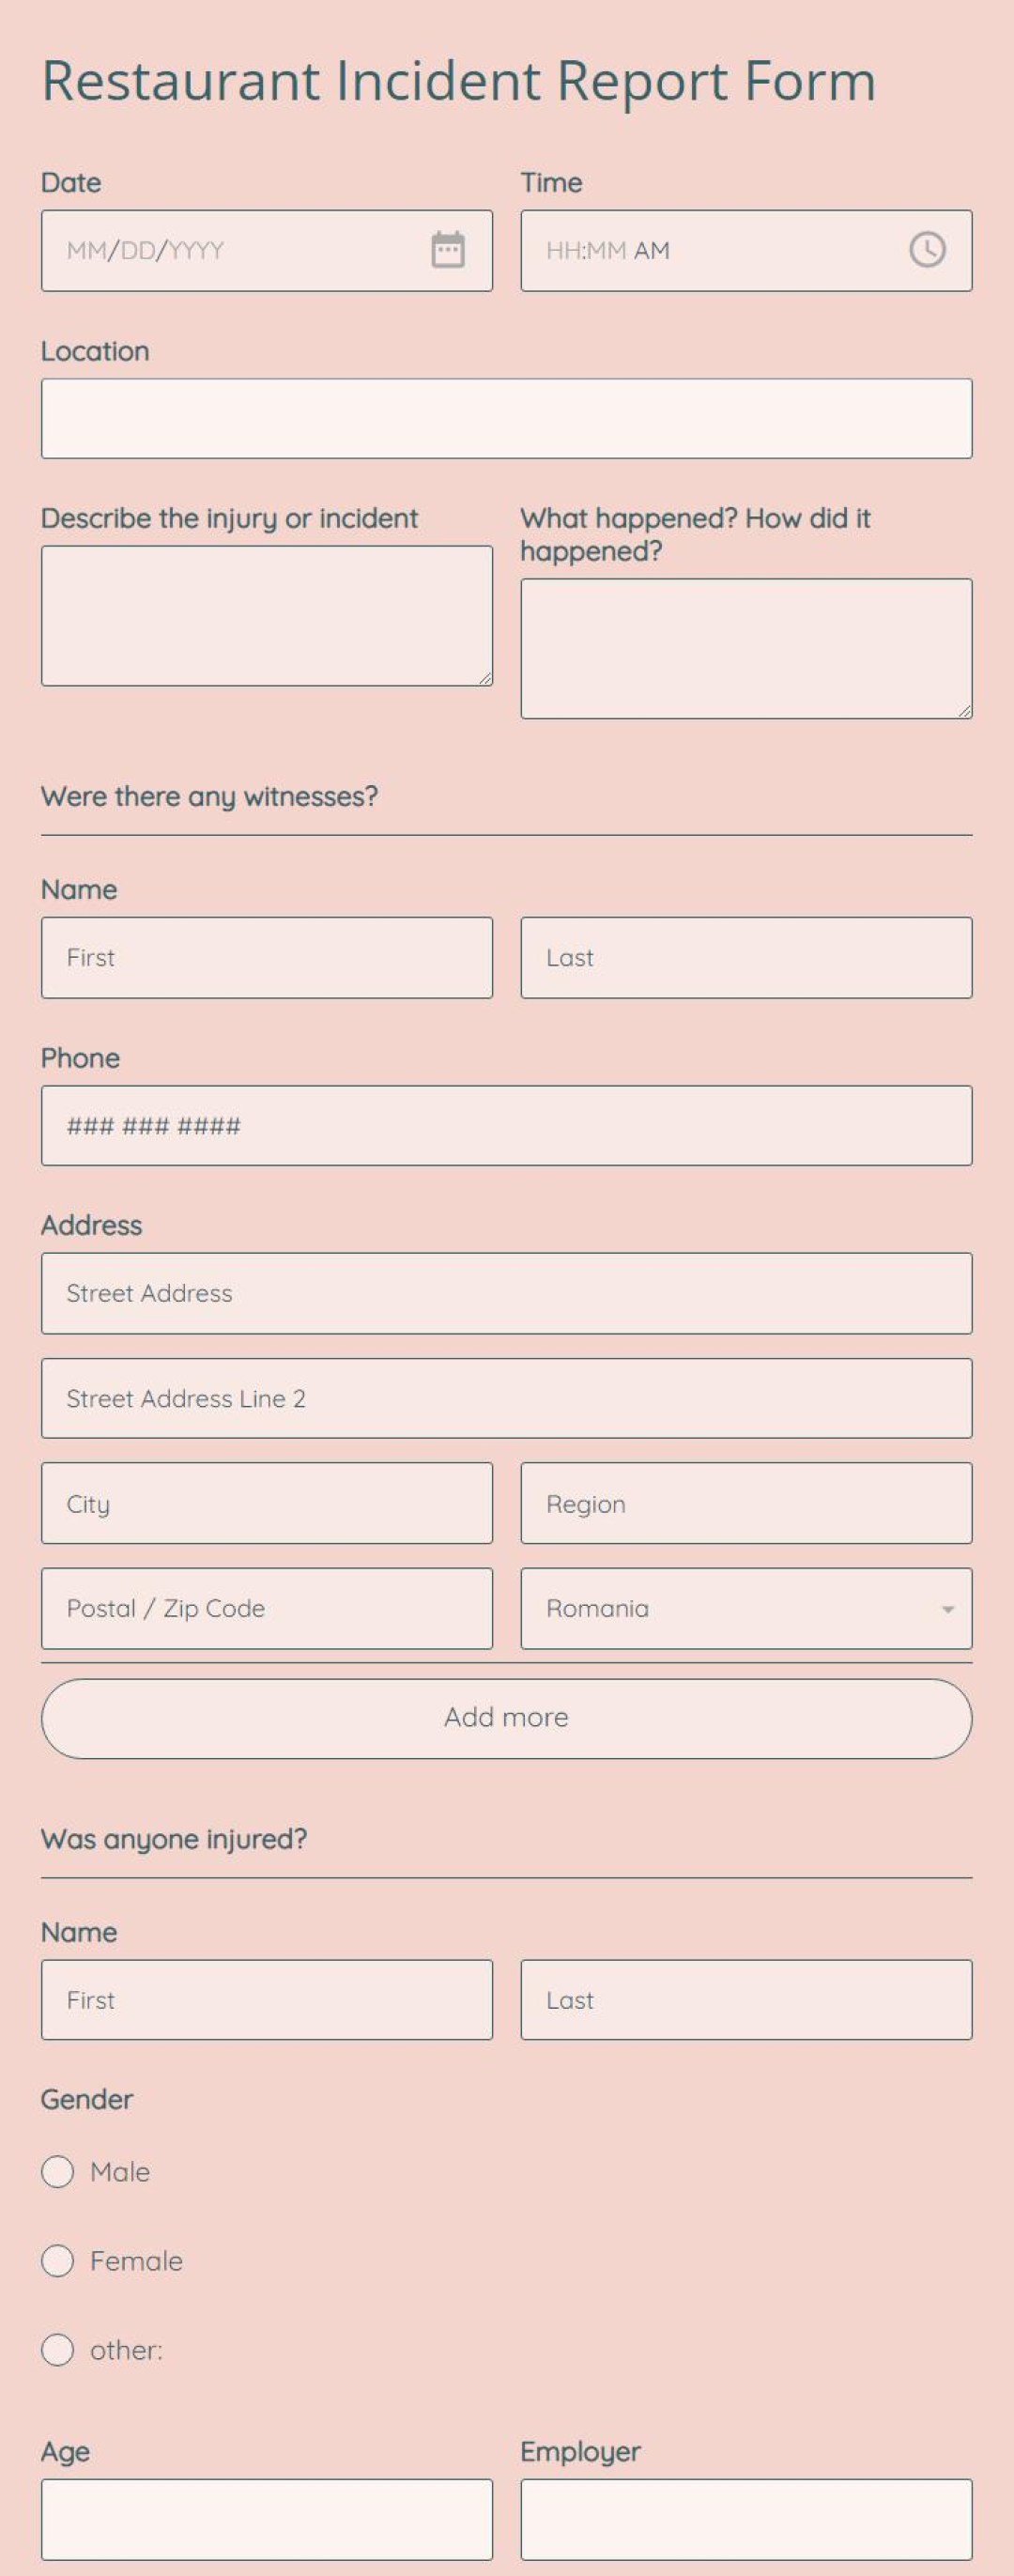 Picture of: Restaurant Incident Report Form Template   Form Builder